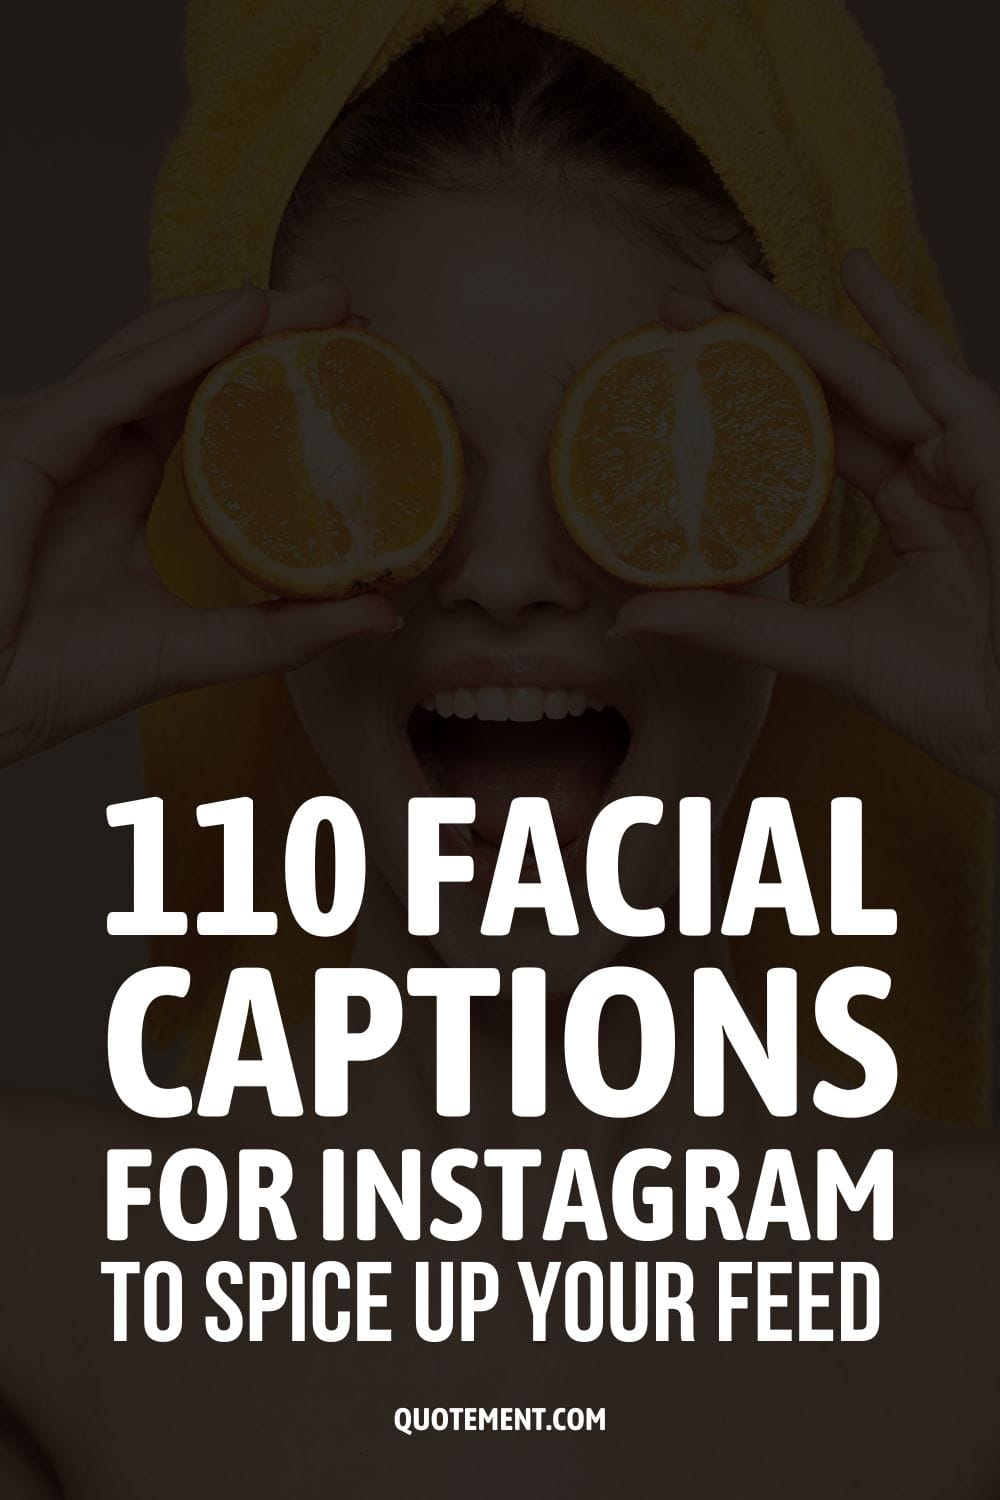 110 Facial Captions For Instagram To Spice Up Your Feed